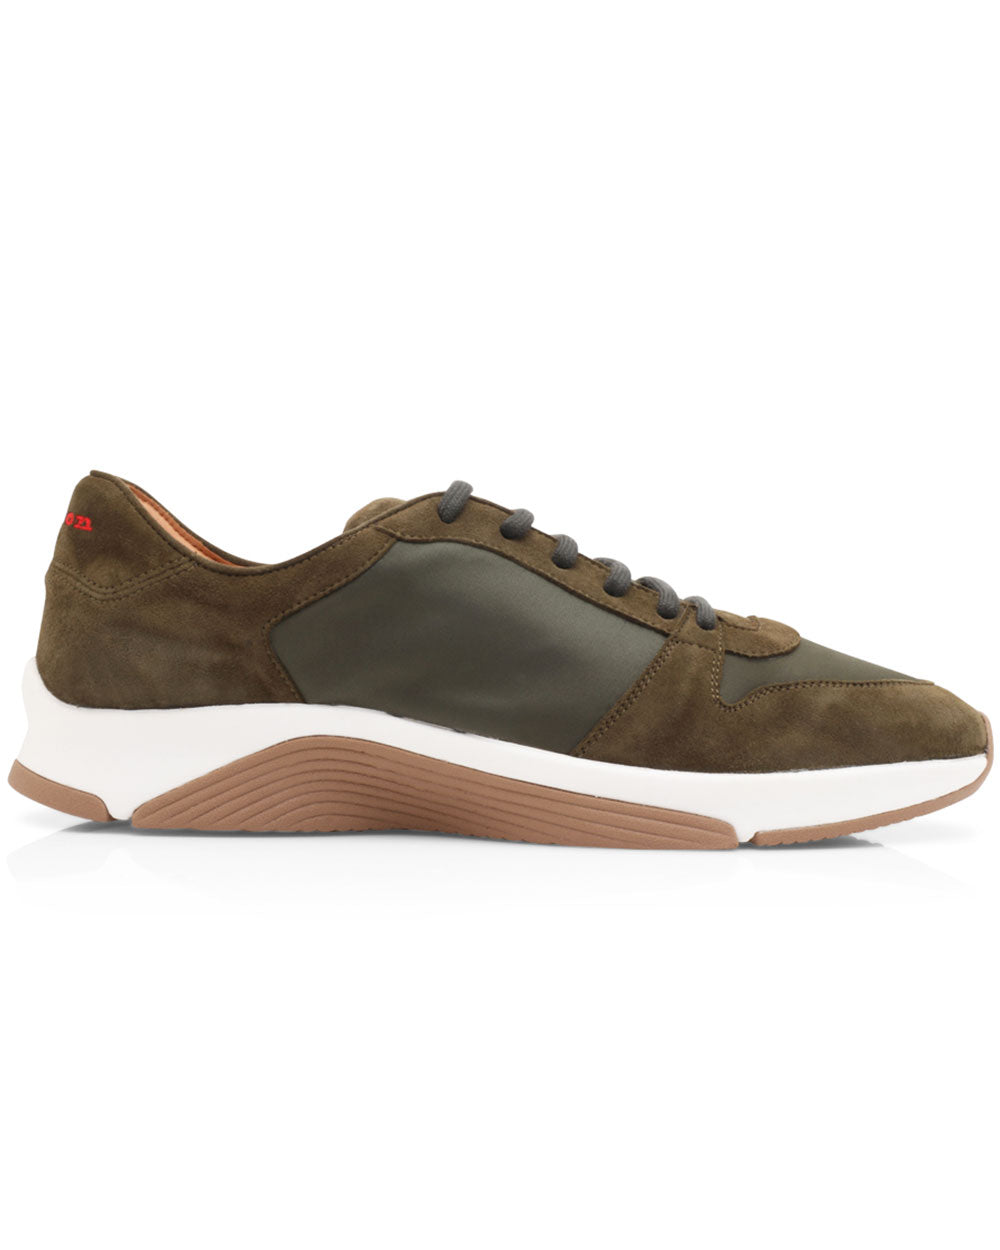 Nylon and Suede Sneaker in Olive